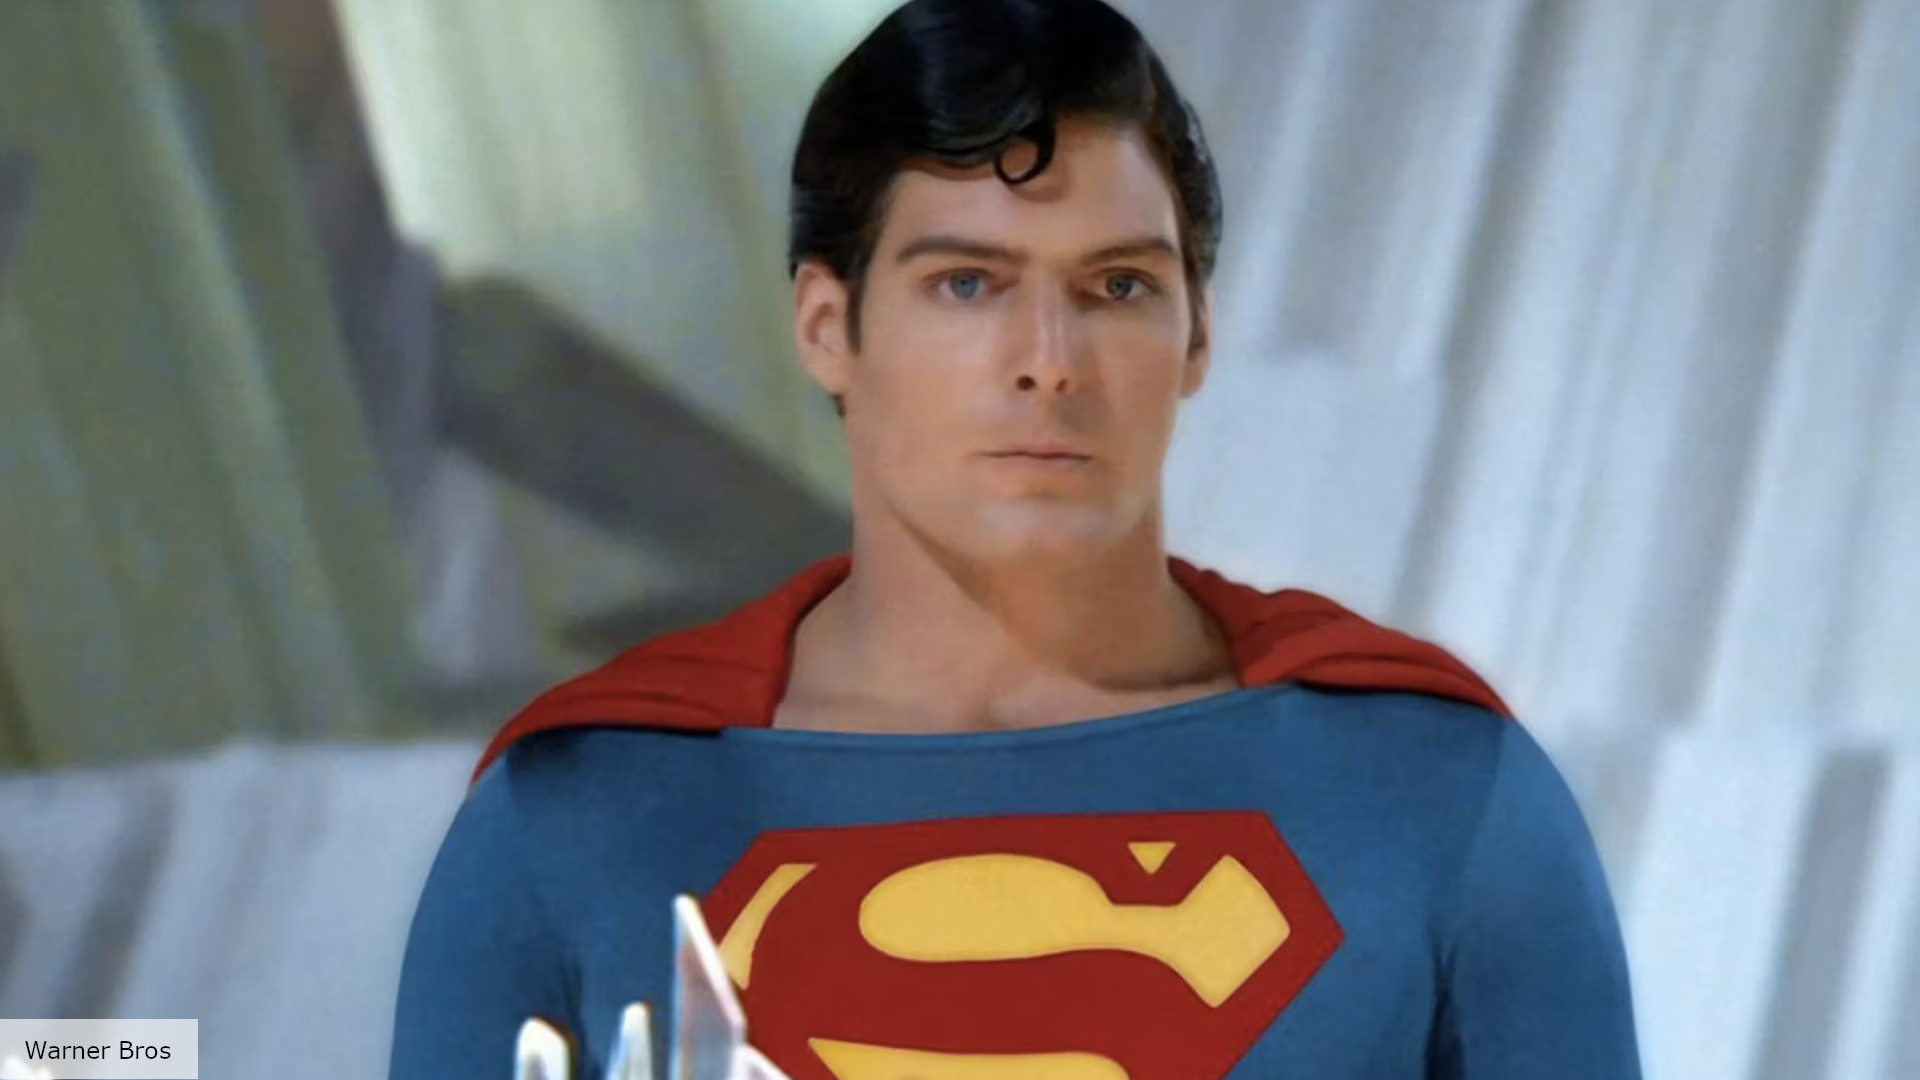 All Superman Movies in Order